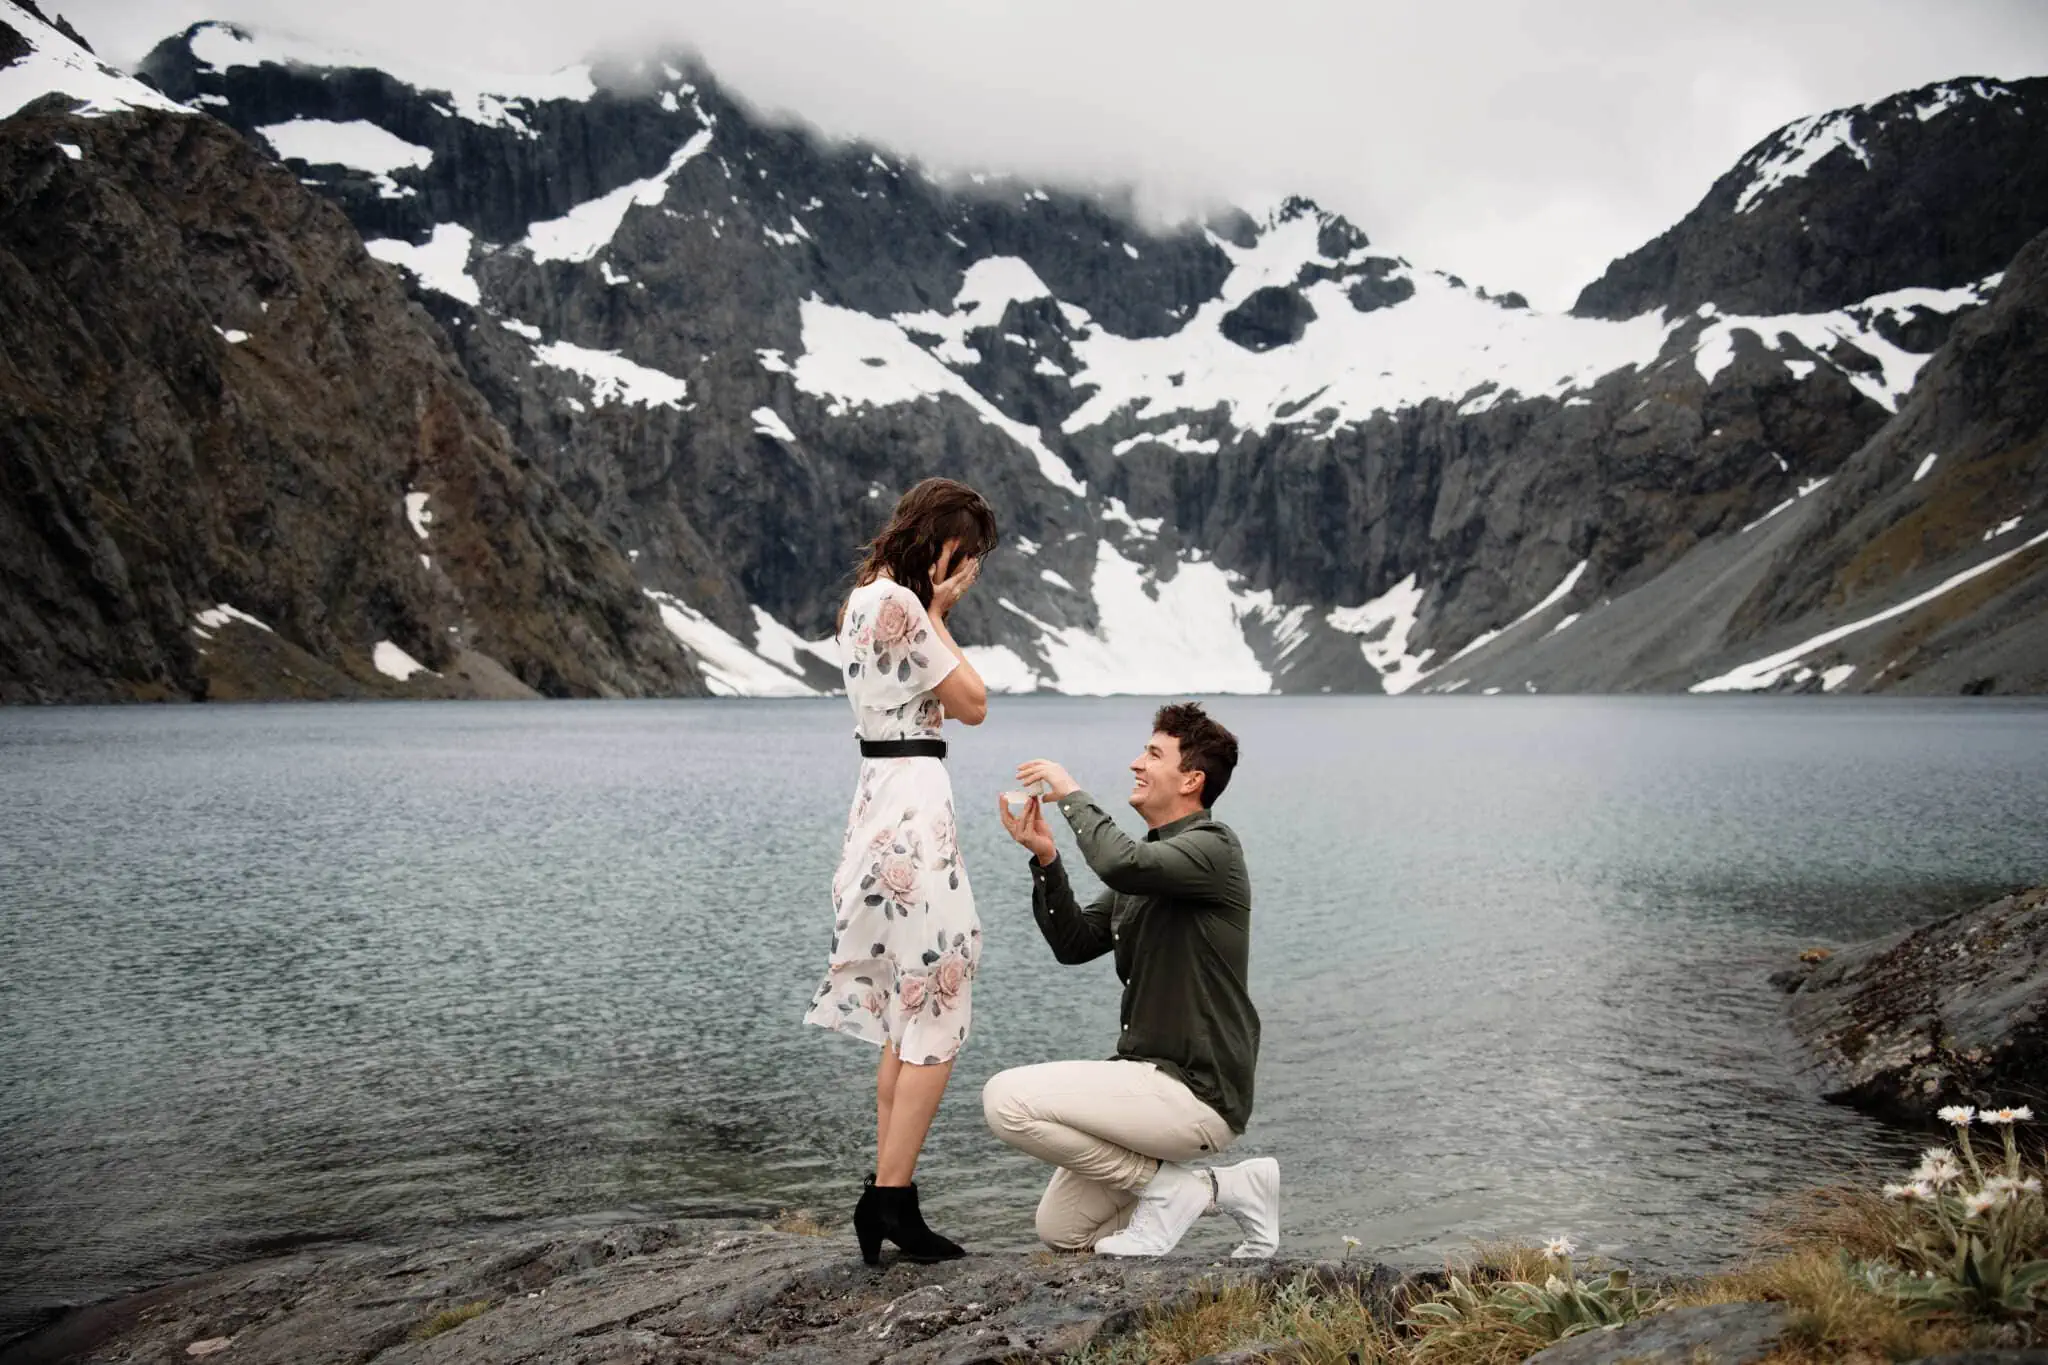 Scott and Hayley are a couple posing by a lake with mountains as their backdrop.